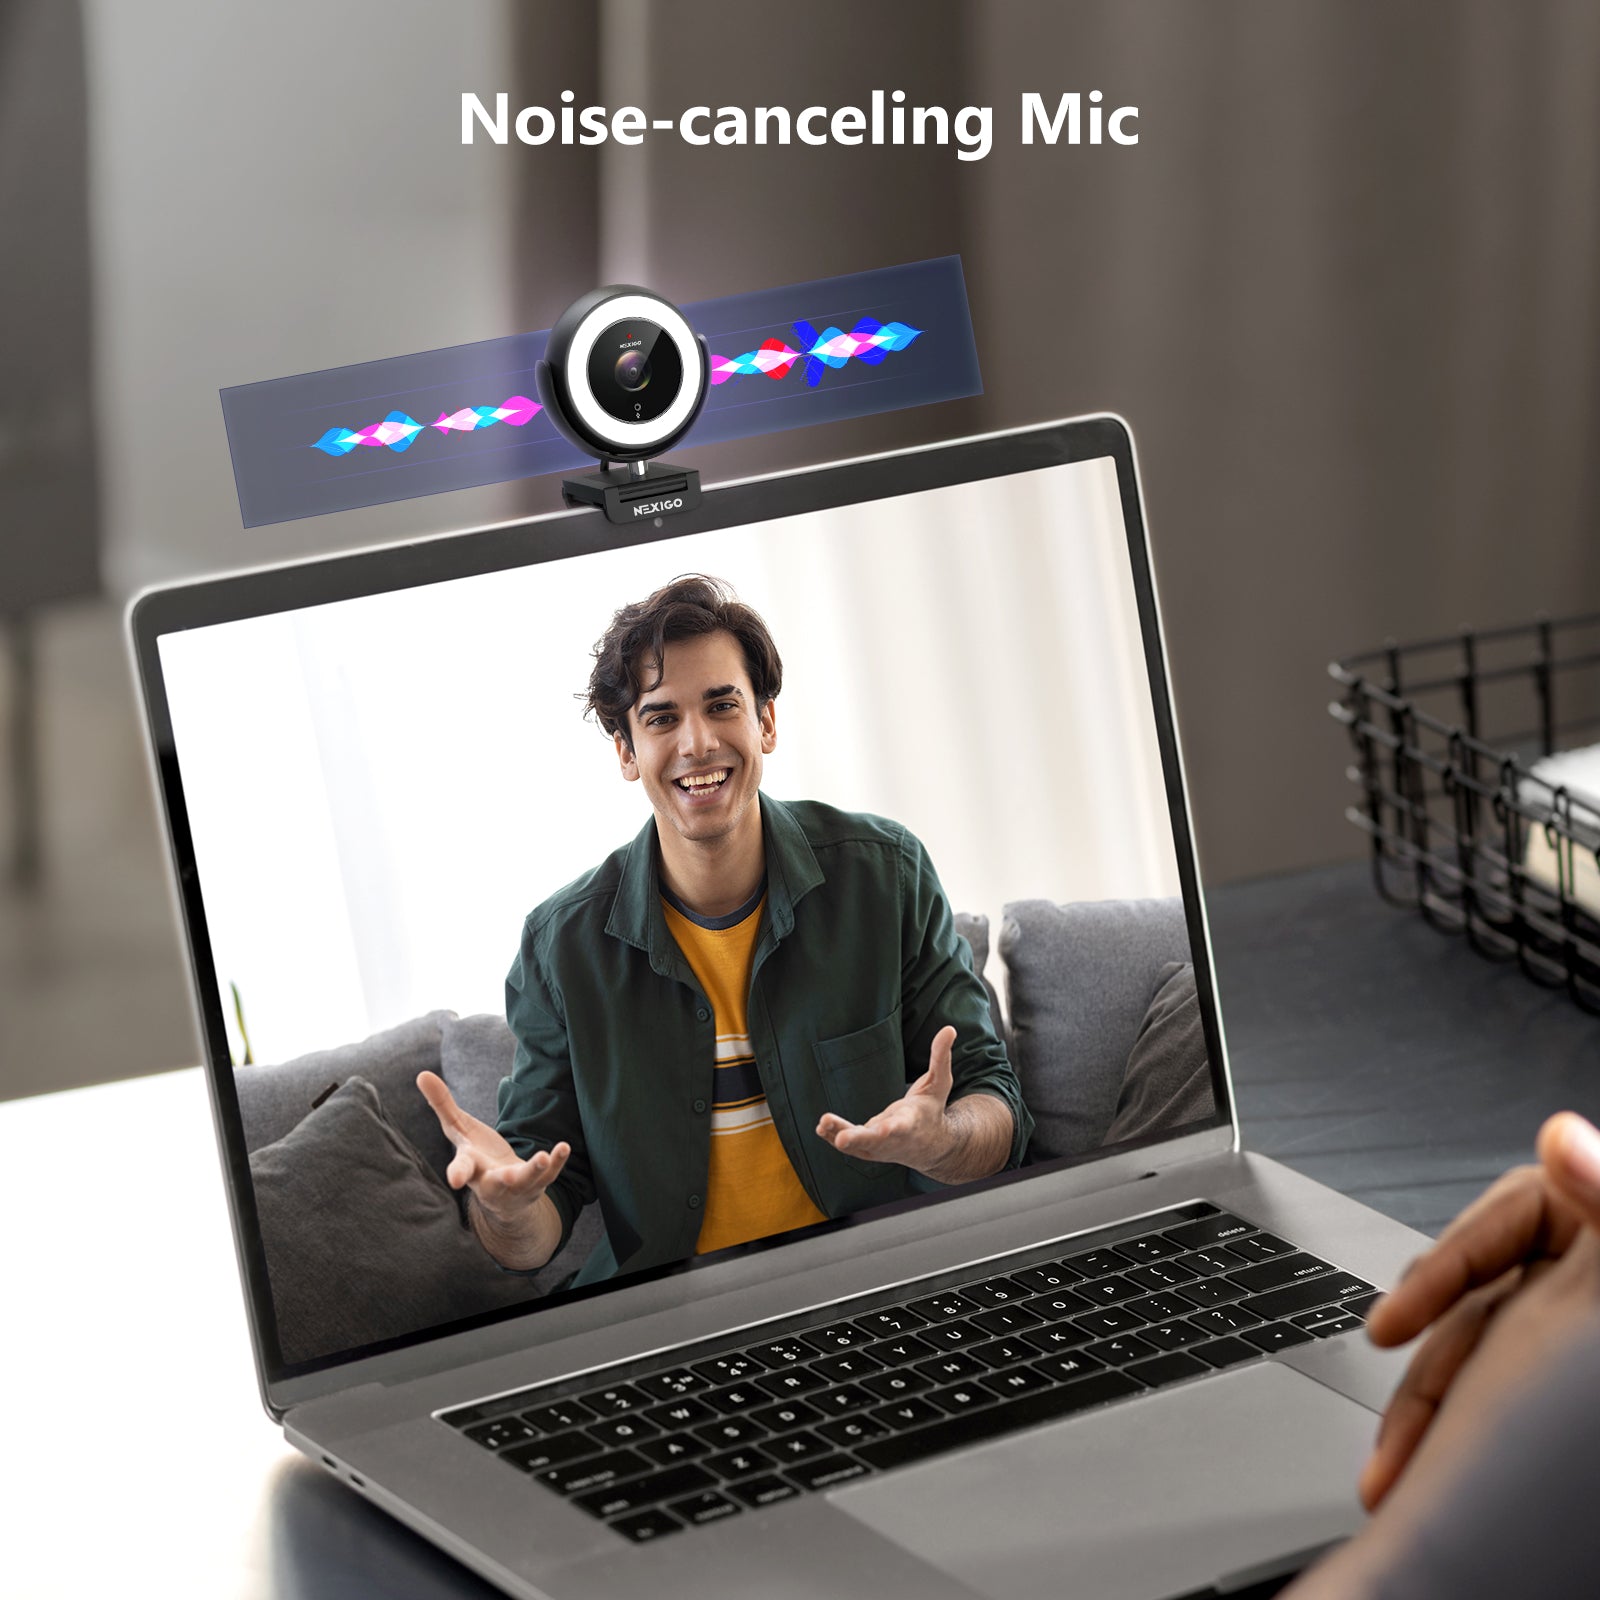 Install the N940E with noise-cancelling microphone on your laptop for improved video sound quality.